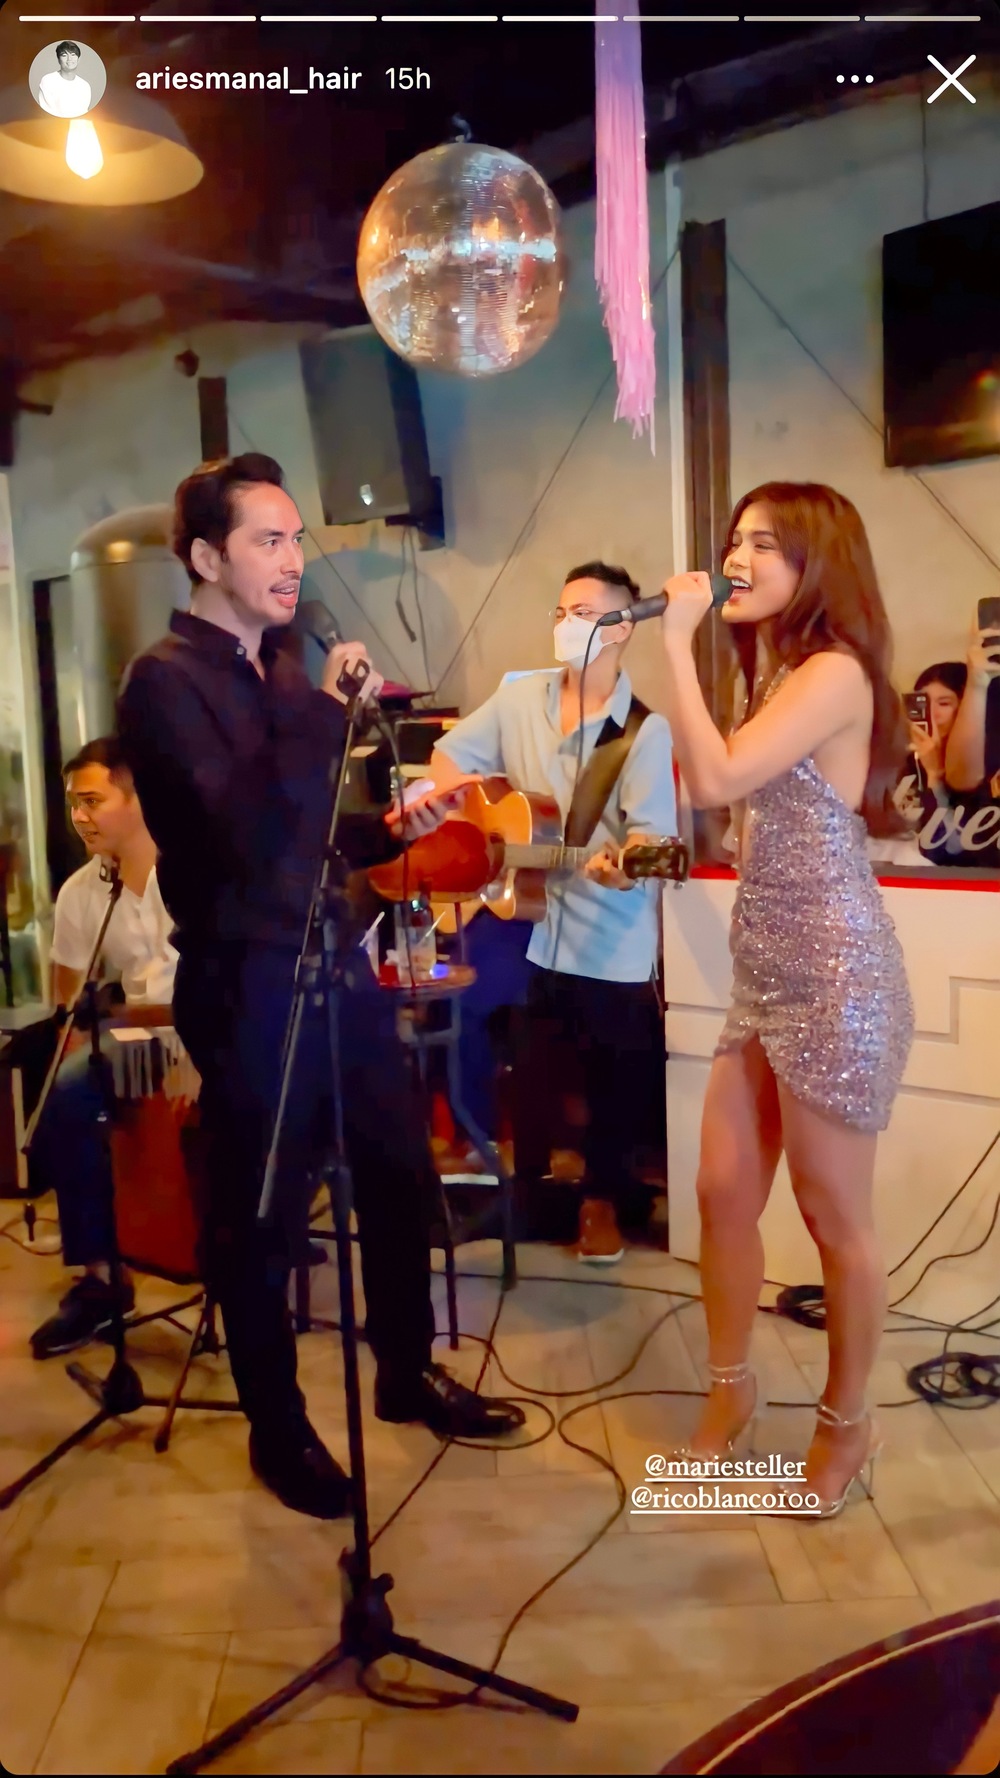 Maris Racal and boyfriend Rico Blanco serenaded the crowd with their performance of Cruisin' by Huey Lewis and the News